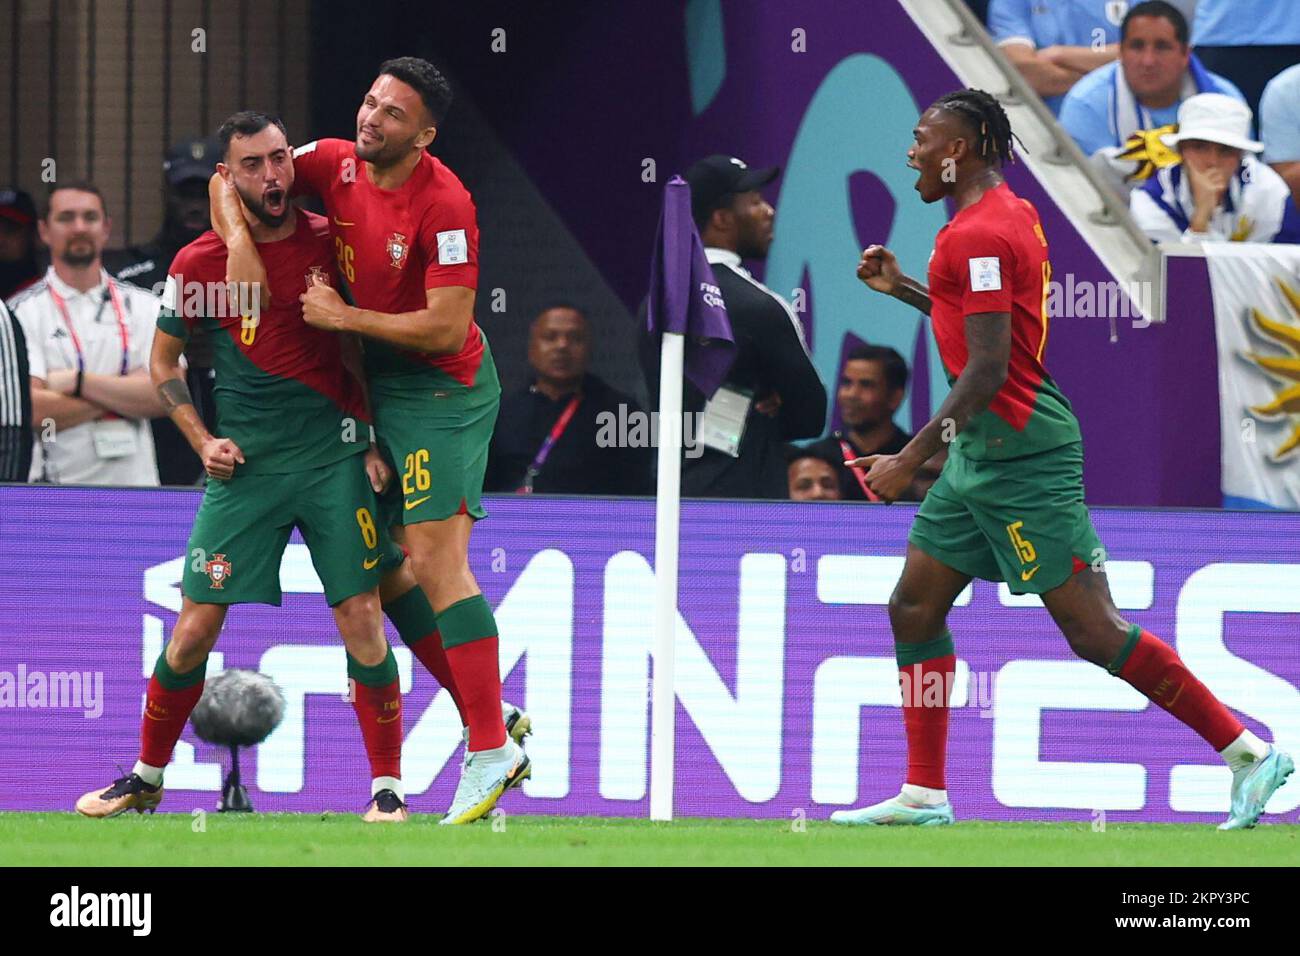 Lusail, Qatar. 28th Nov, 2022. Soccer, 2022 World Cup in Qatar, Portugal - Uruguay, Preliminary Round, Group H, Matchday 2, Lusail Stadium, Portugal's Bruno Fernandes (l) celebrates his goal to make it 2-0 with teammates Goncalo Ramos (m) and Rafael Leao. Credit: Tom Weller/dpa/Alamy Live News Stock Photo